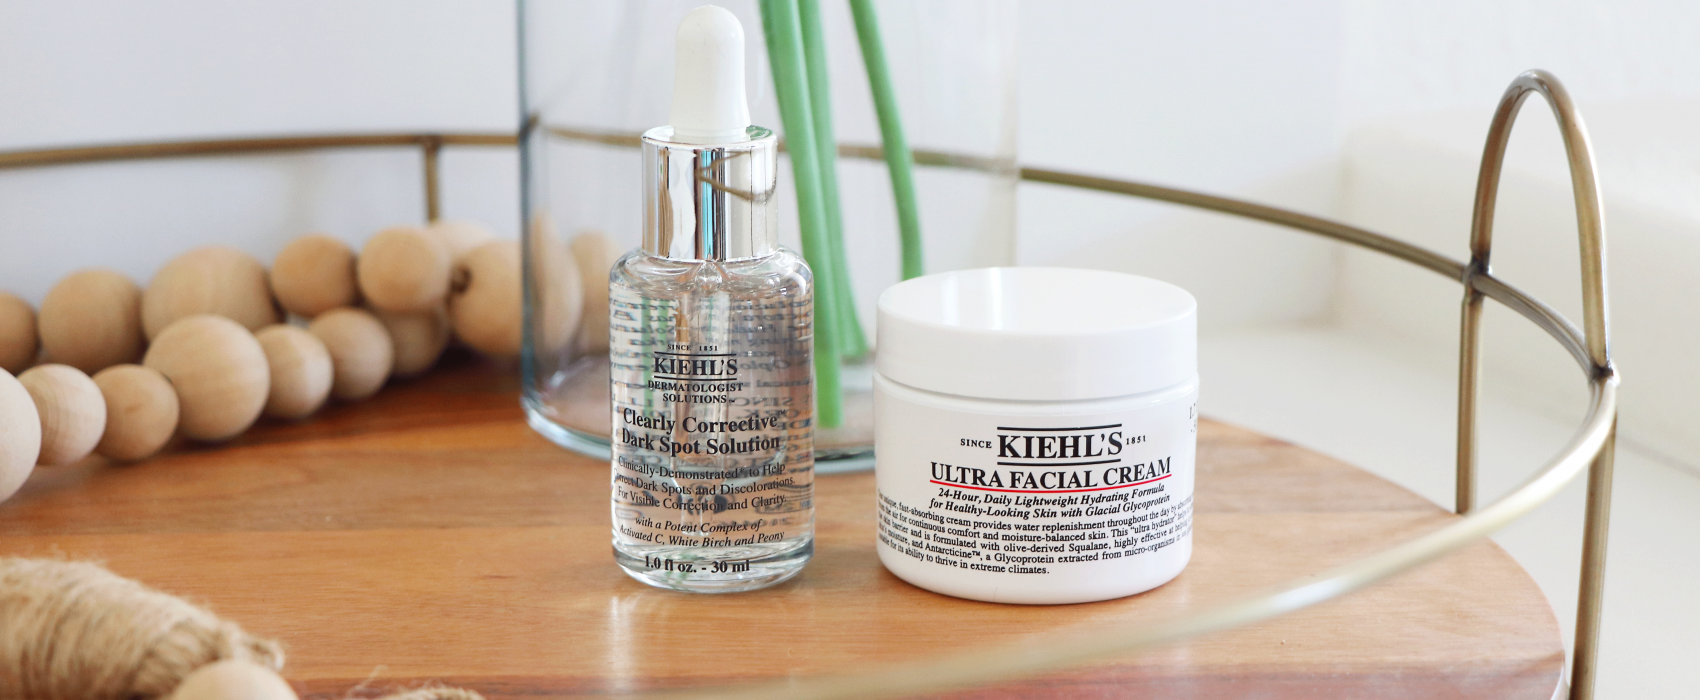 Looking for a few of the best Kiehl's products? Los Angeles Blogger Jamie Lewis is sharing her top 5 Kiehl's must-haves HERE!